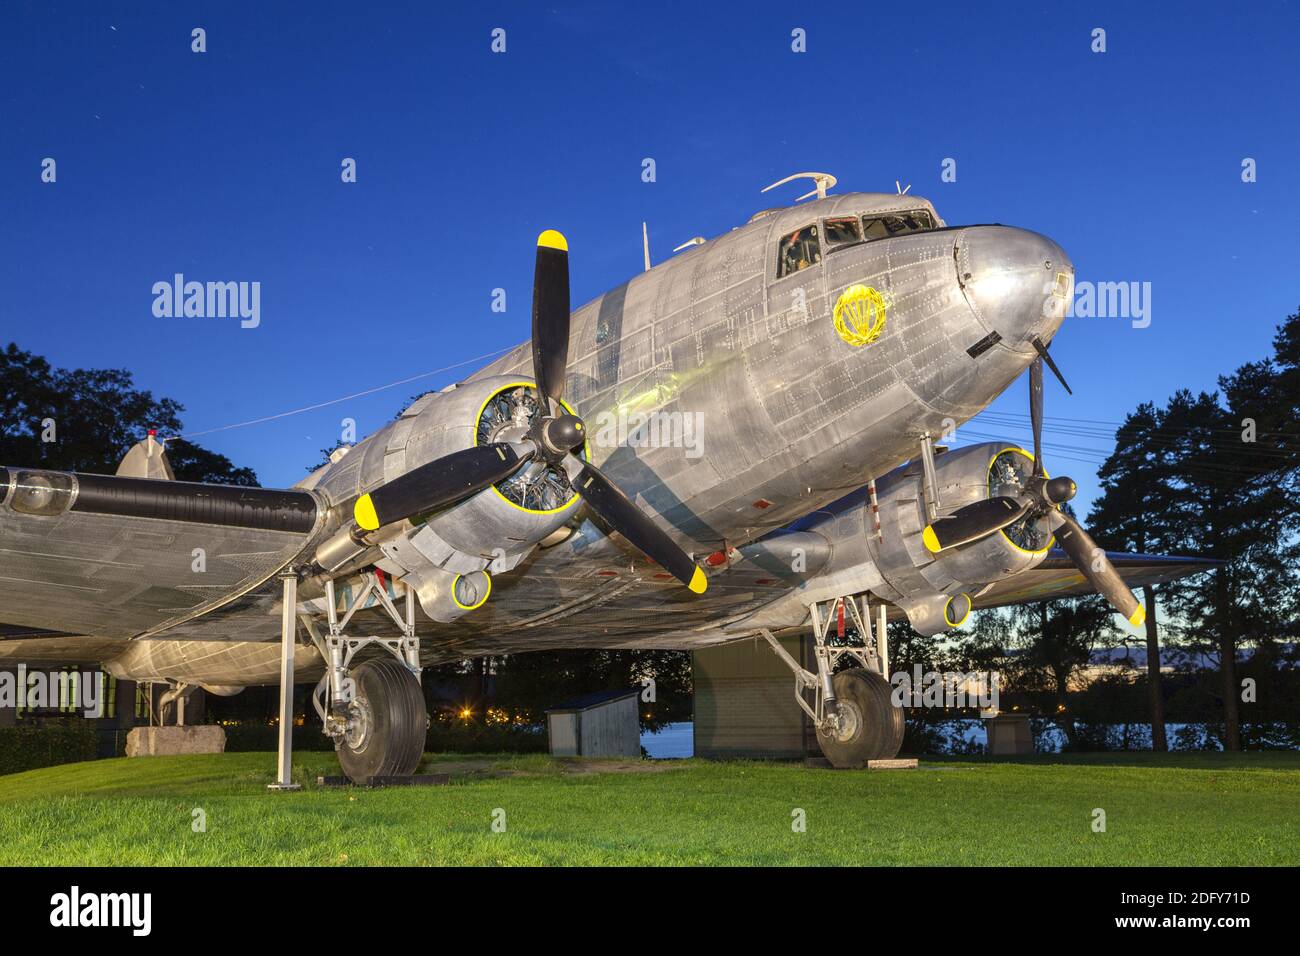 Dc 3 Airliner High Resolution Stock Photography and Images - Alamy